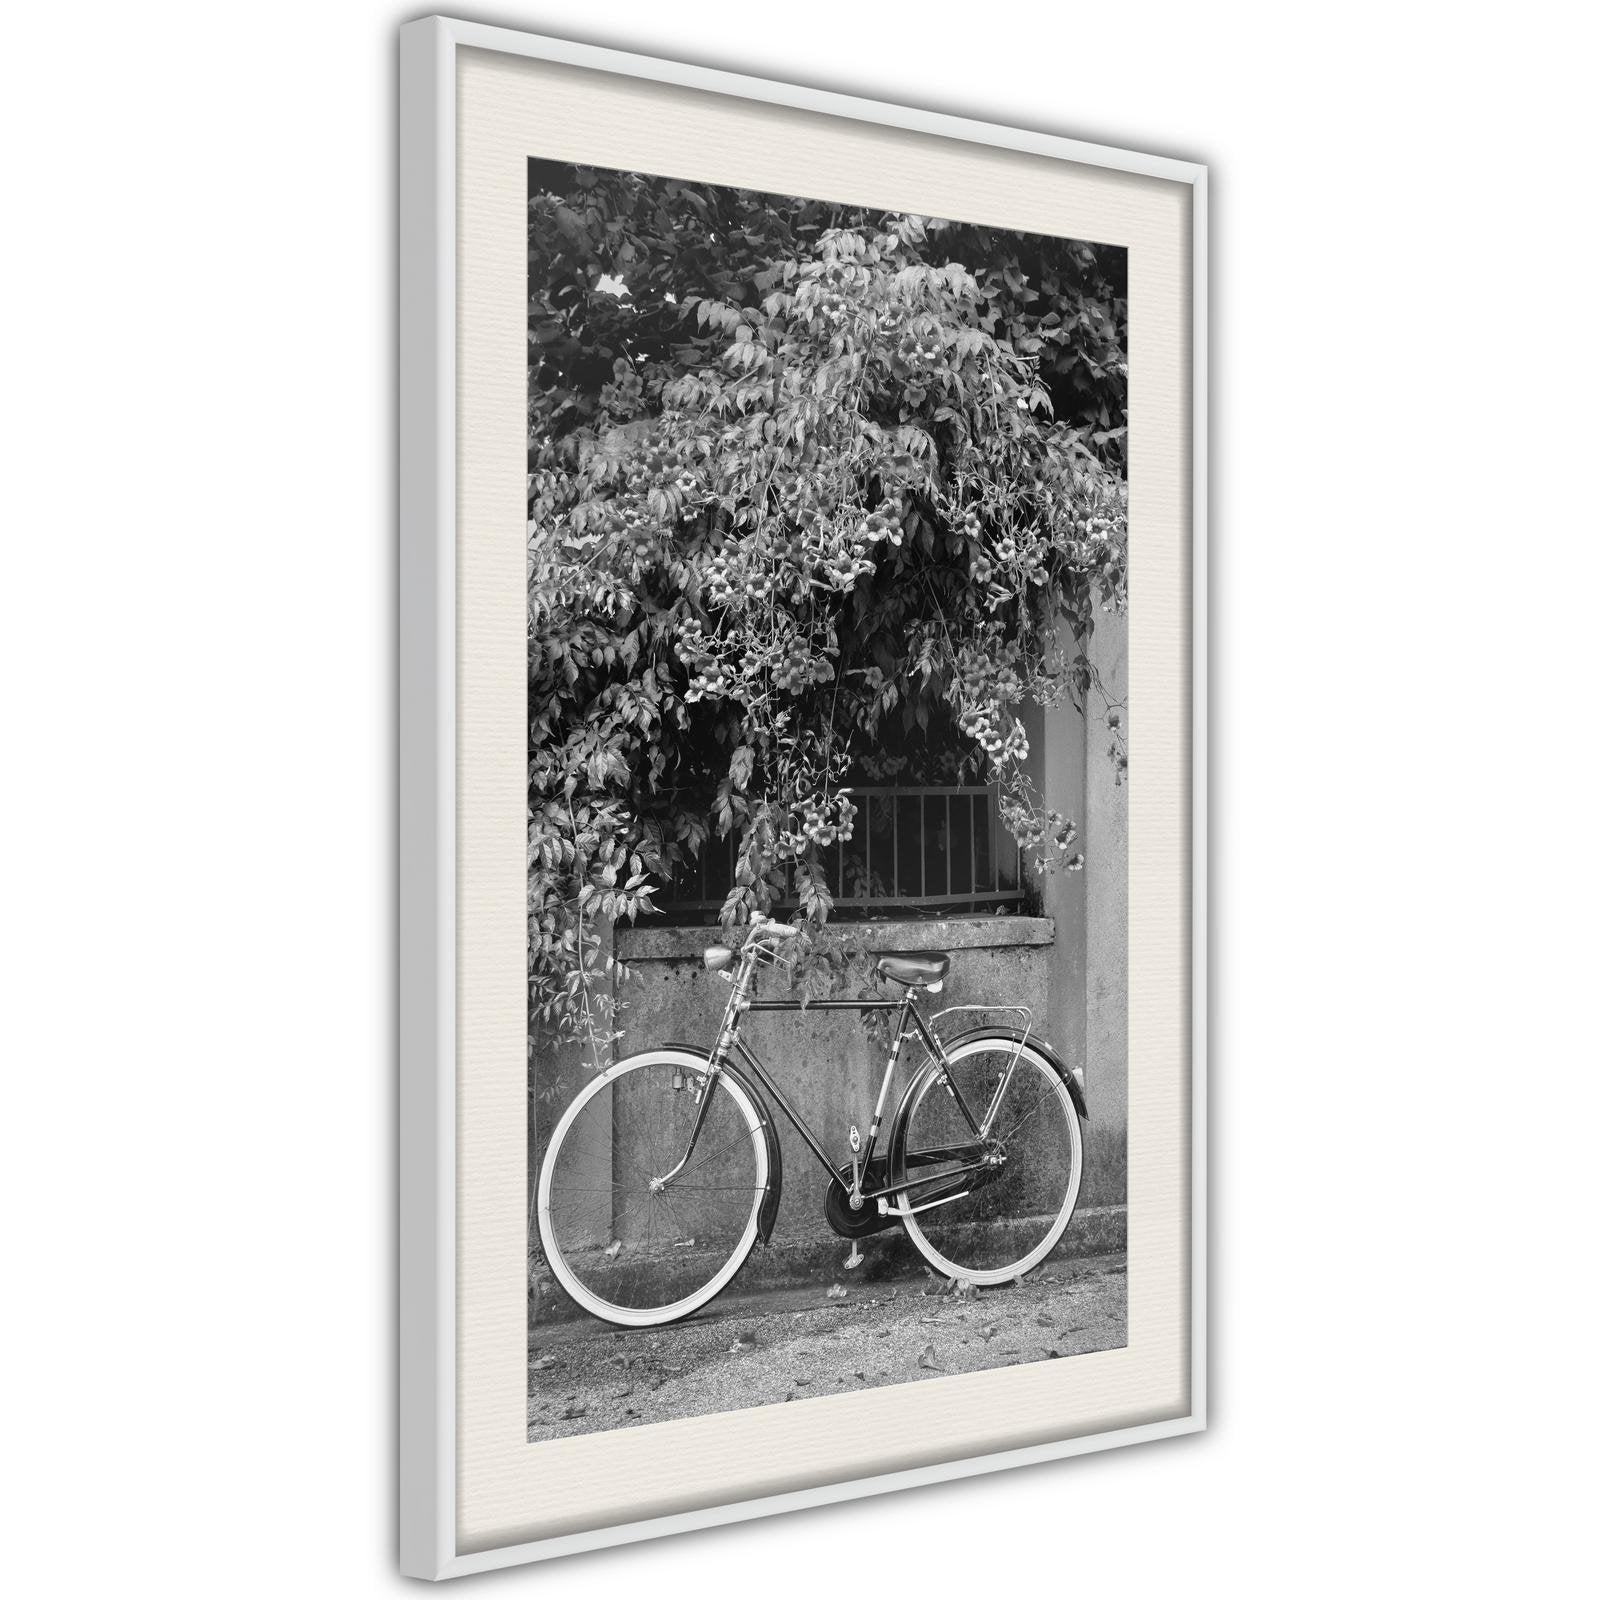 Inramad Poster / Tavla - Bicycle with White Tires-Poster Inramad-Artgeist-peaceofhome.se